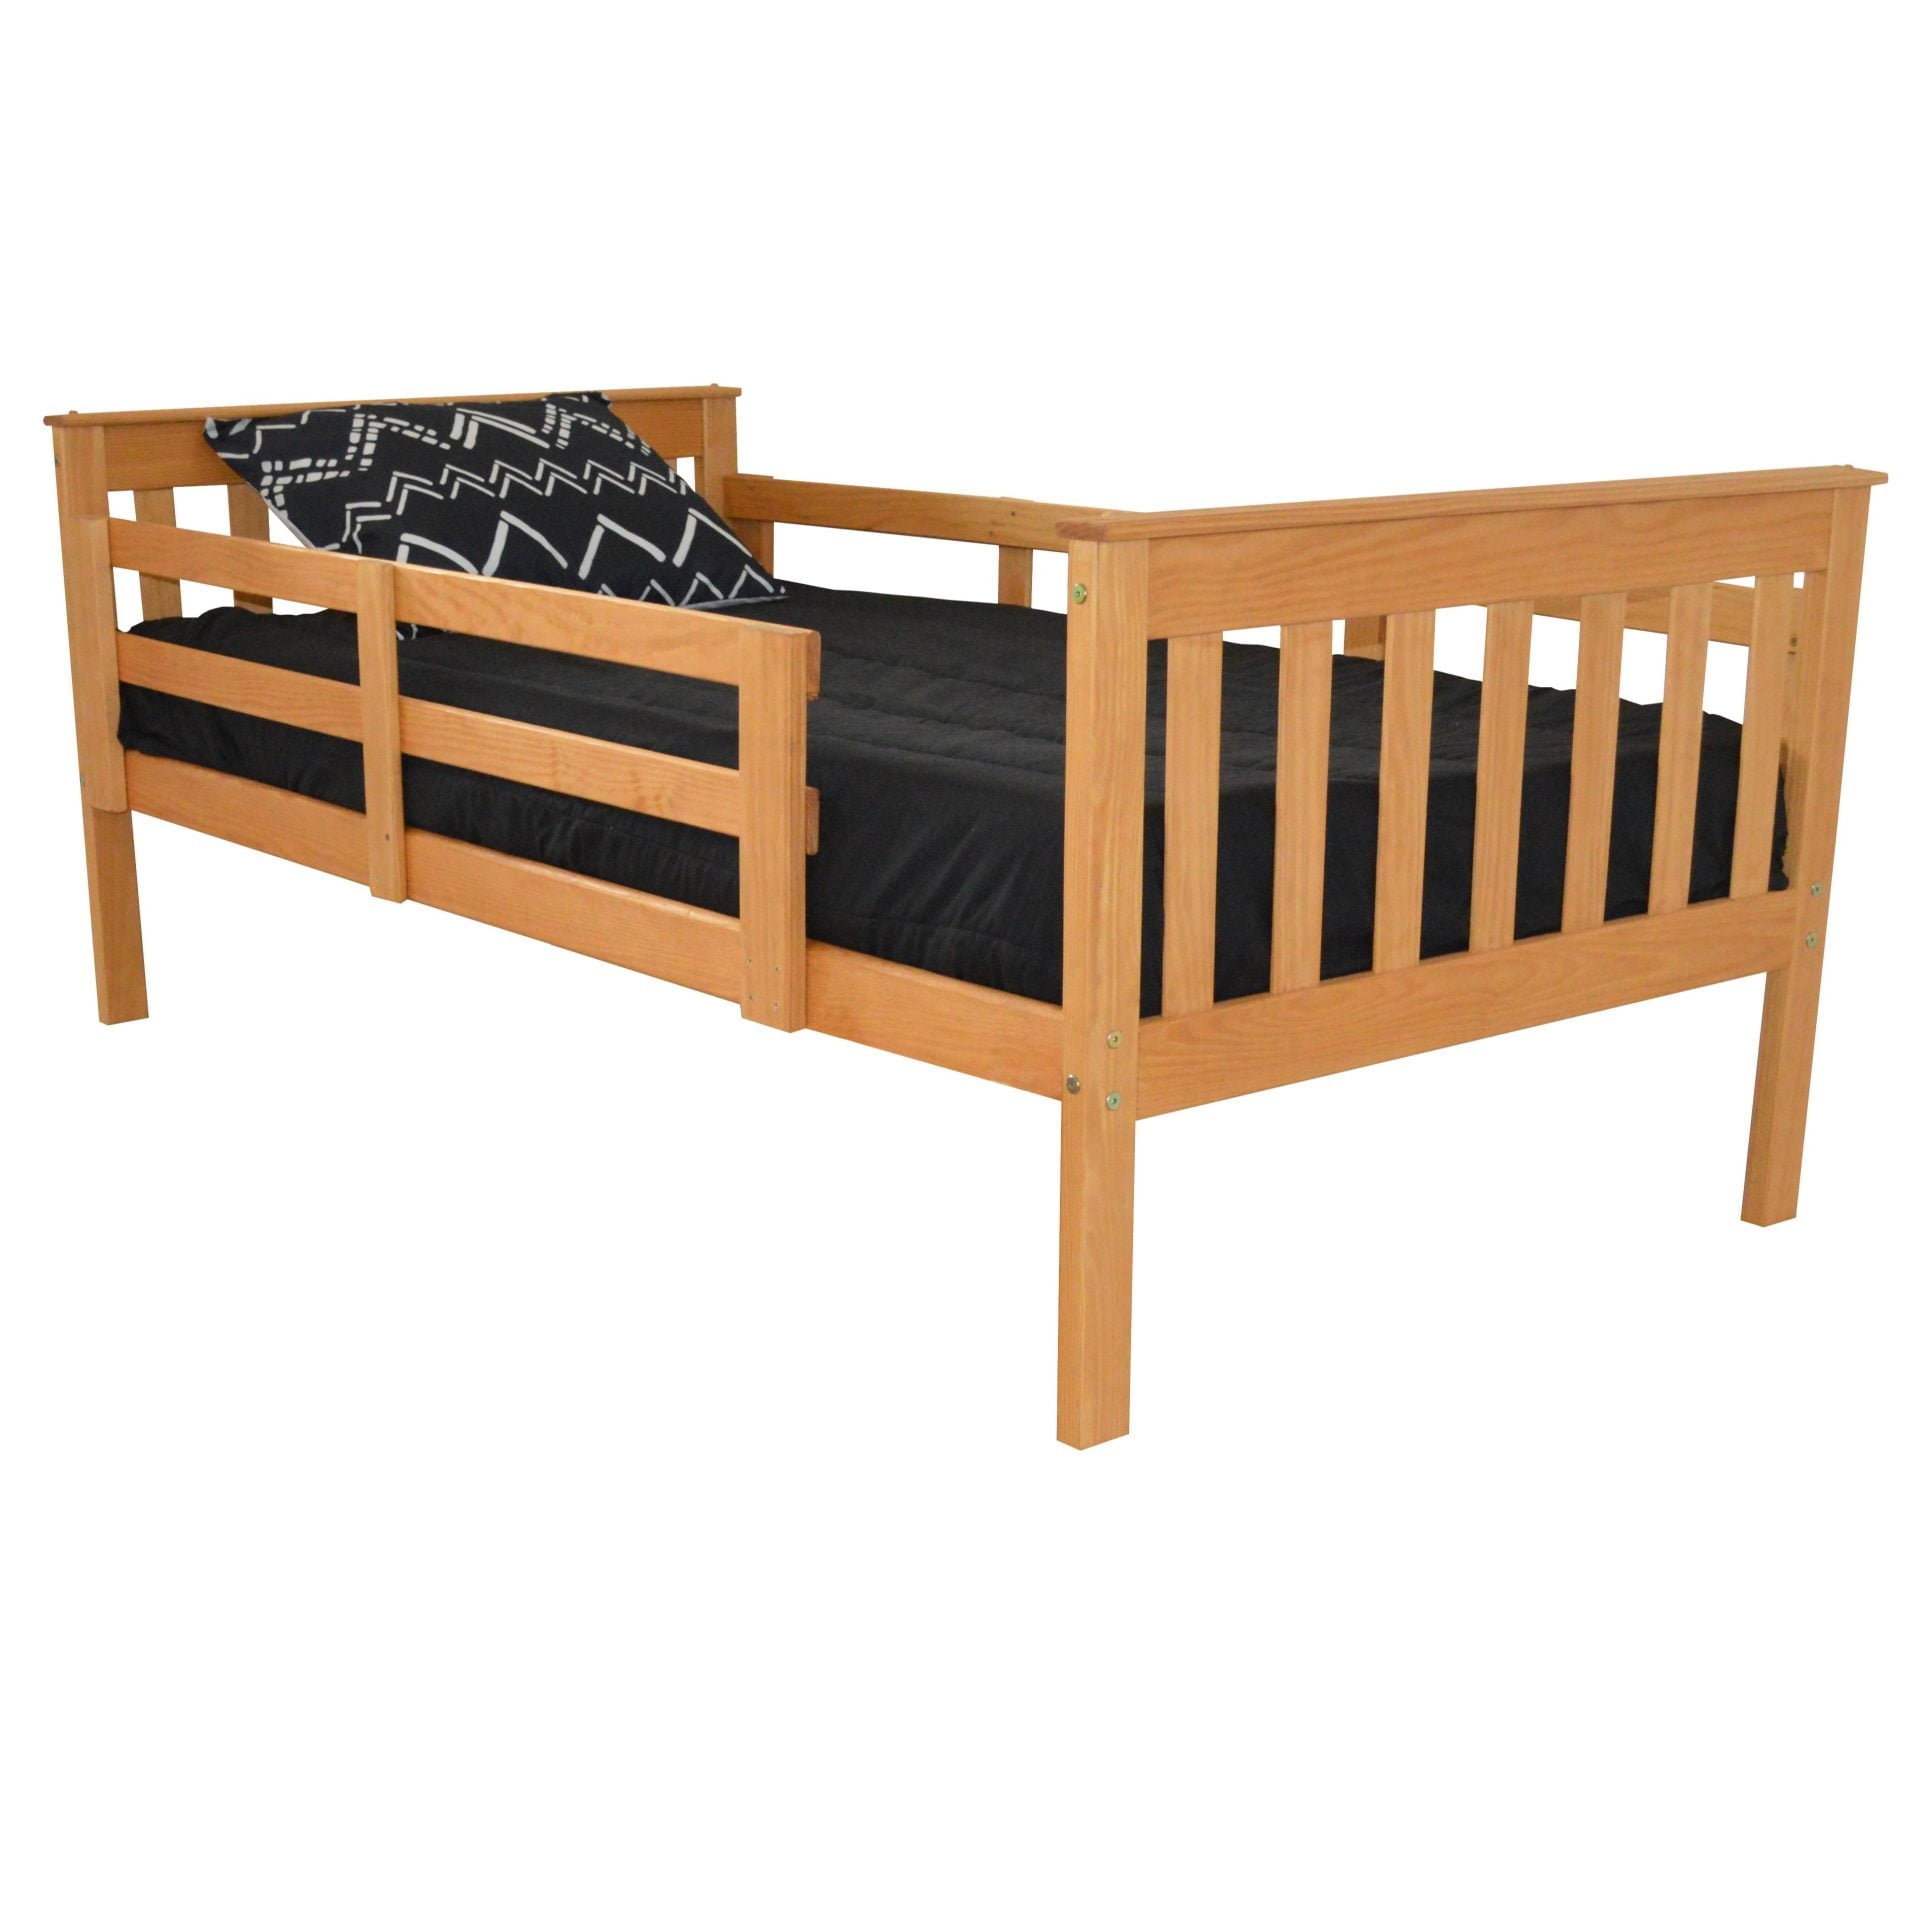 A&L Furniture VersaLoft Mission Bed with Safety Rails – Twin and Full Sizes